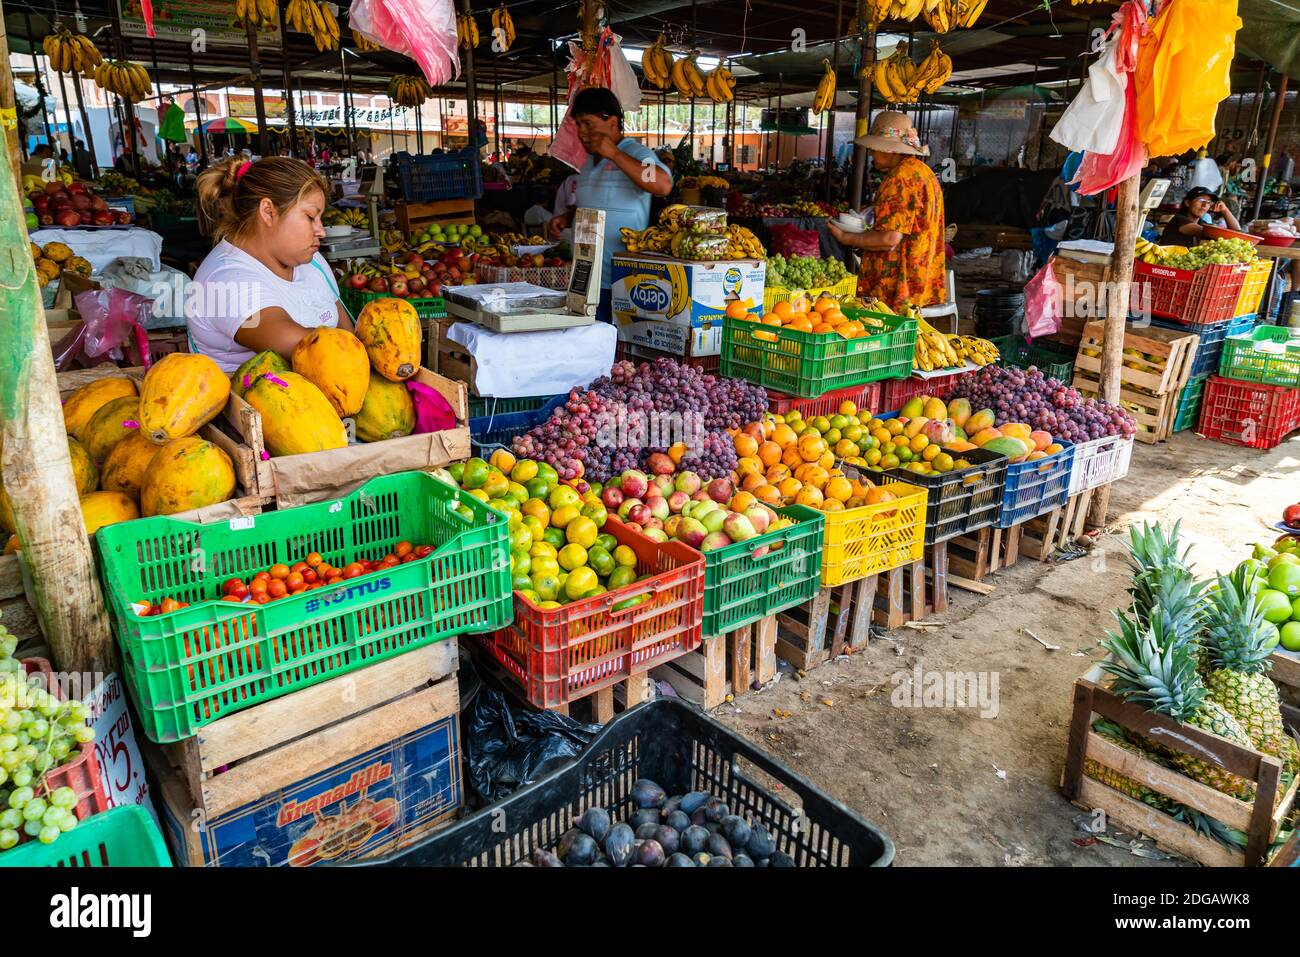 Peruvian people buy and sell fruits in the market at Nazca Peru Stock Photo